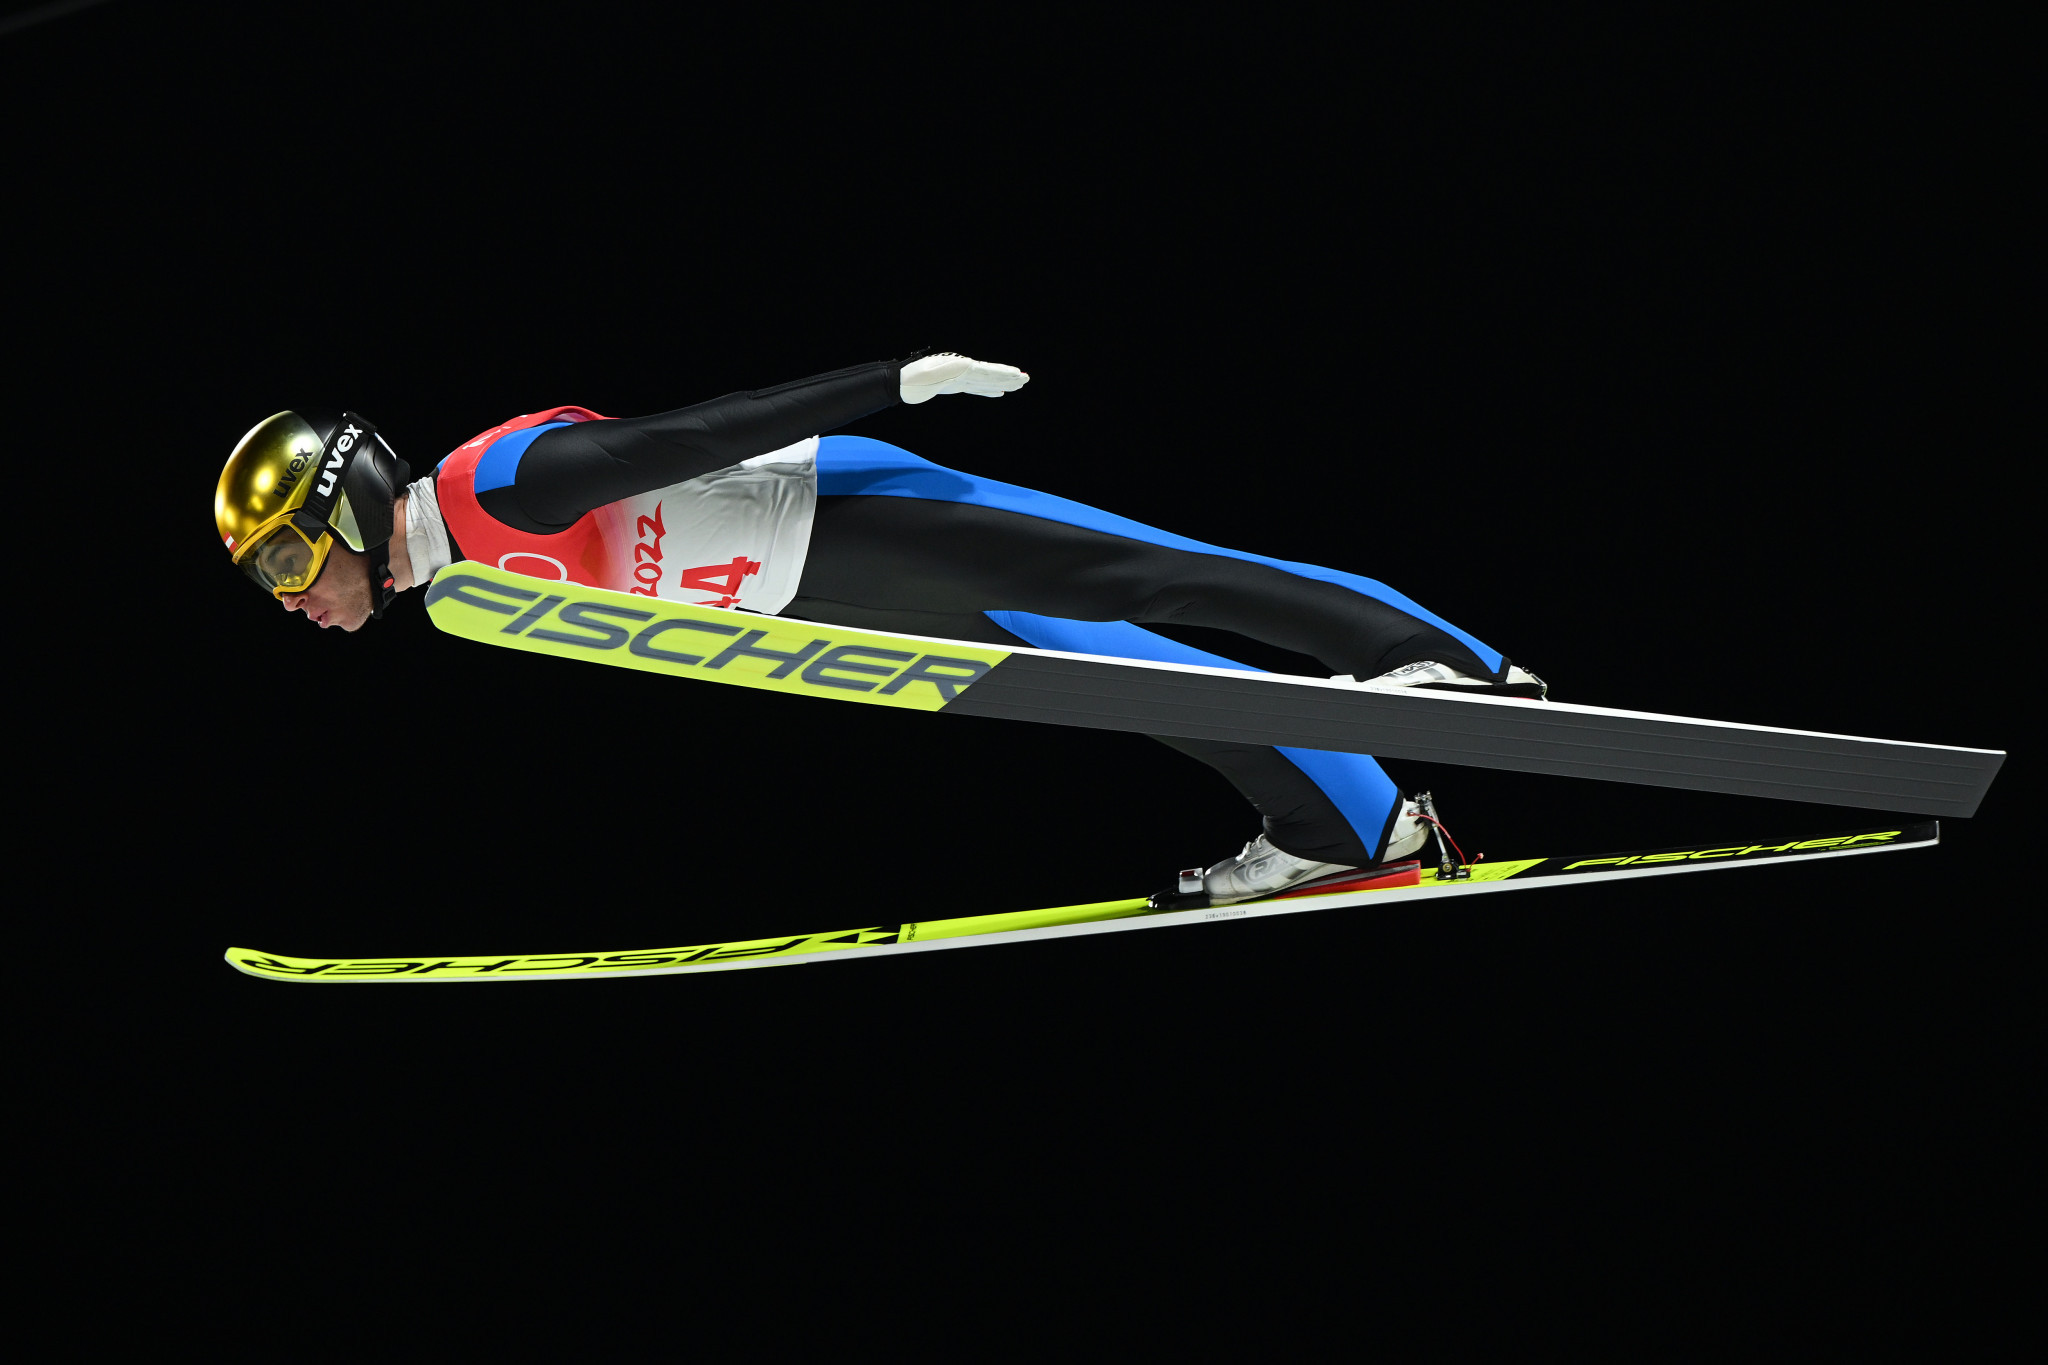 Stefan Kraft topped qualification on day one of the Ski Jumping World Cup in Oberstdorf ©Getty Images